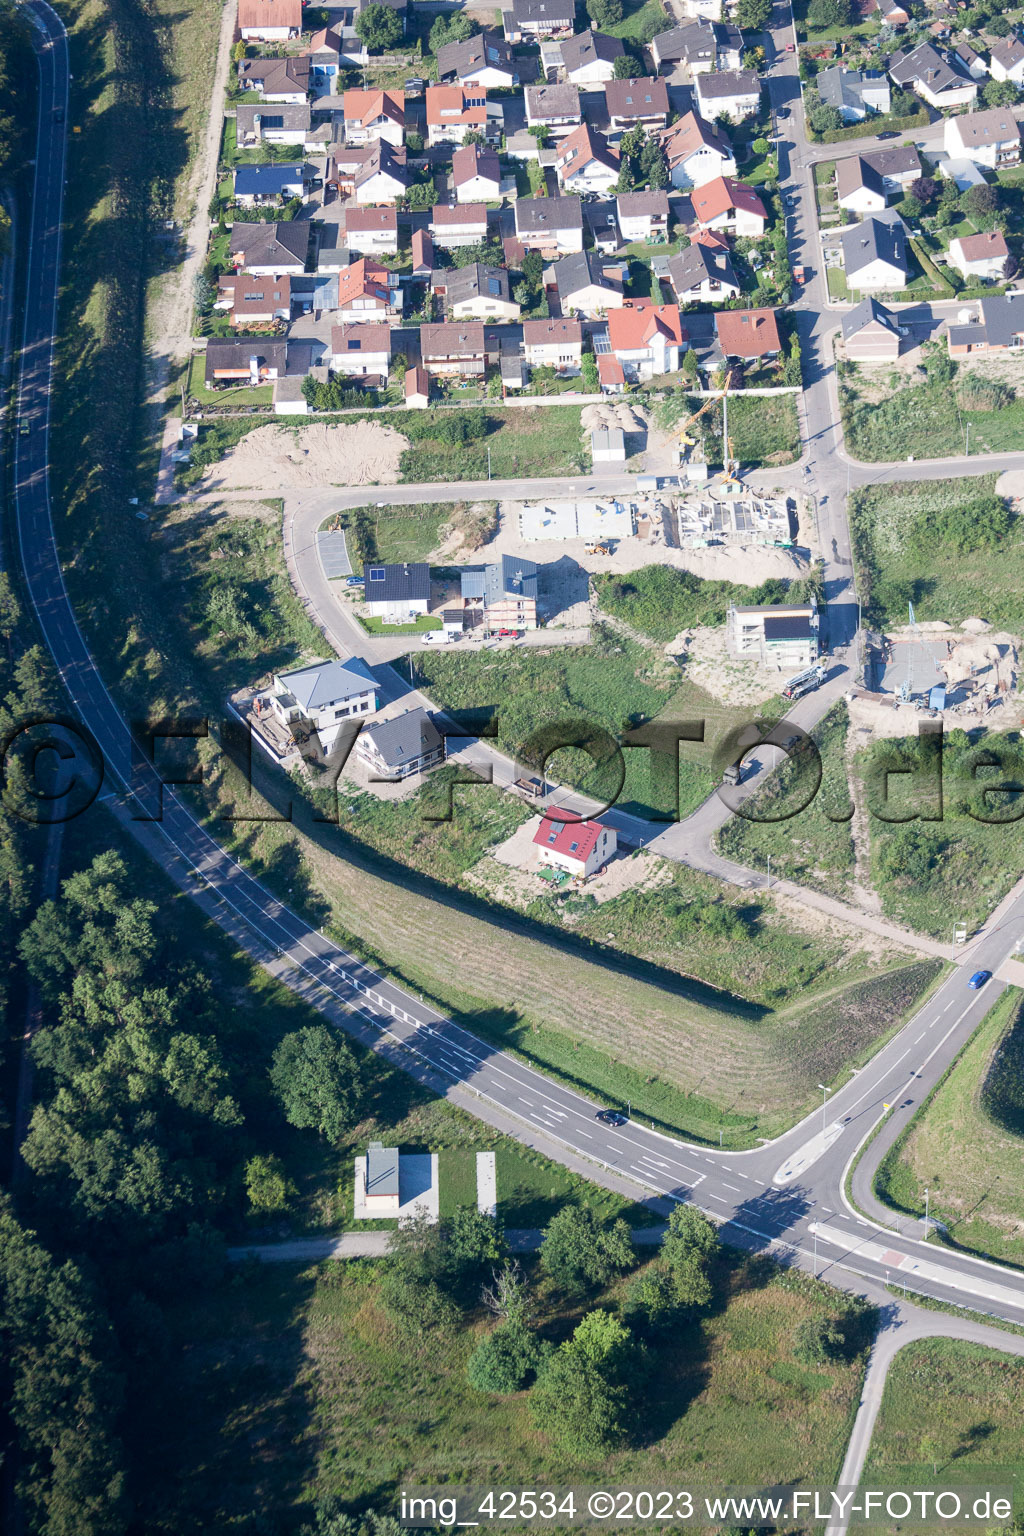 Oblique view of New development area west in Jockgrim in the state Rhineland-Palatinate, Germany